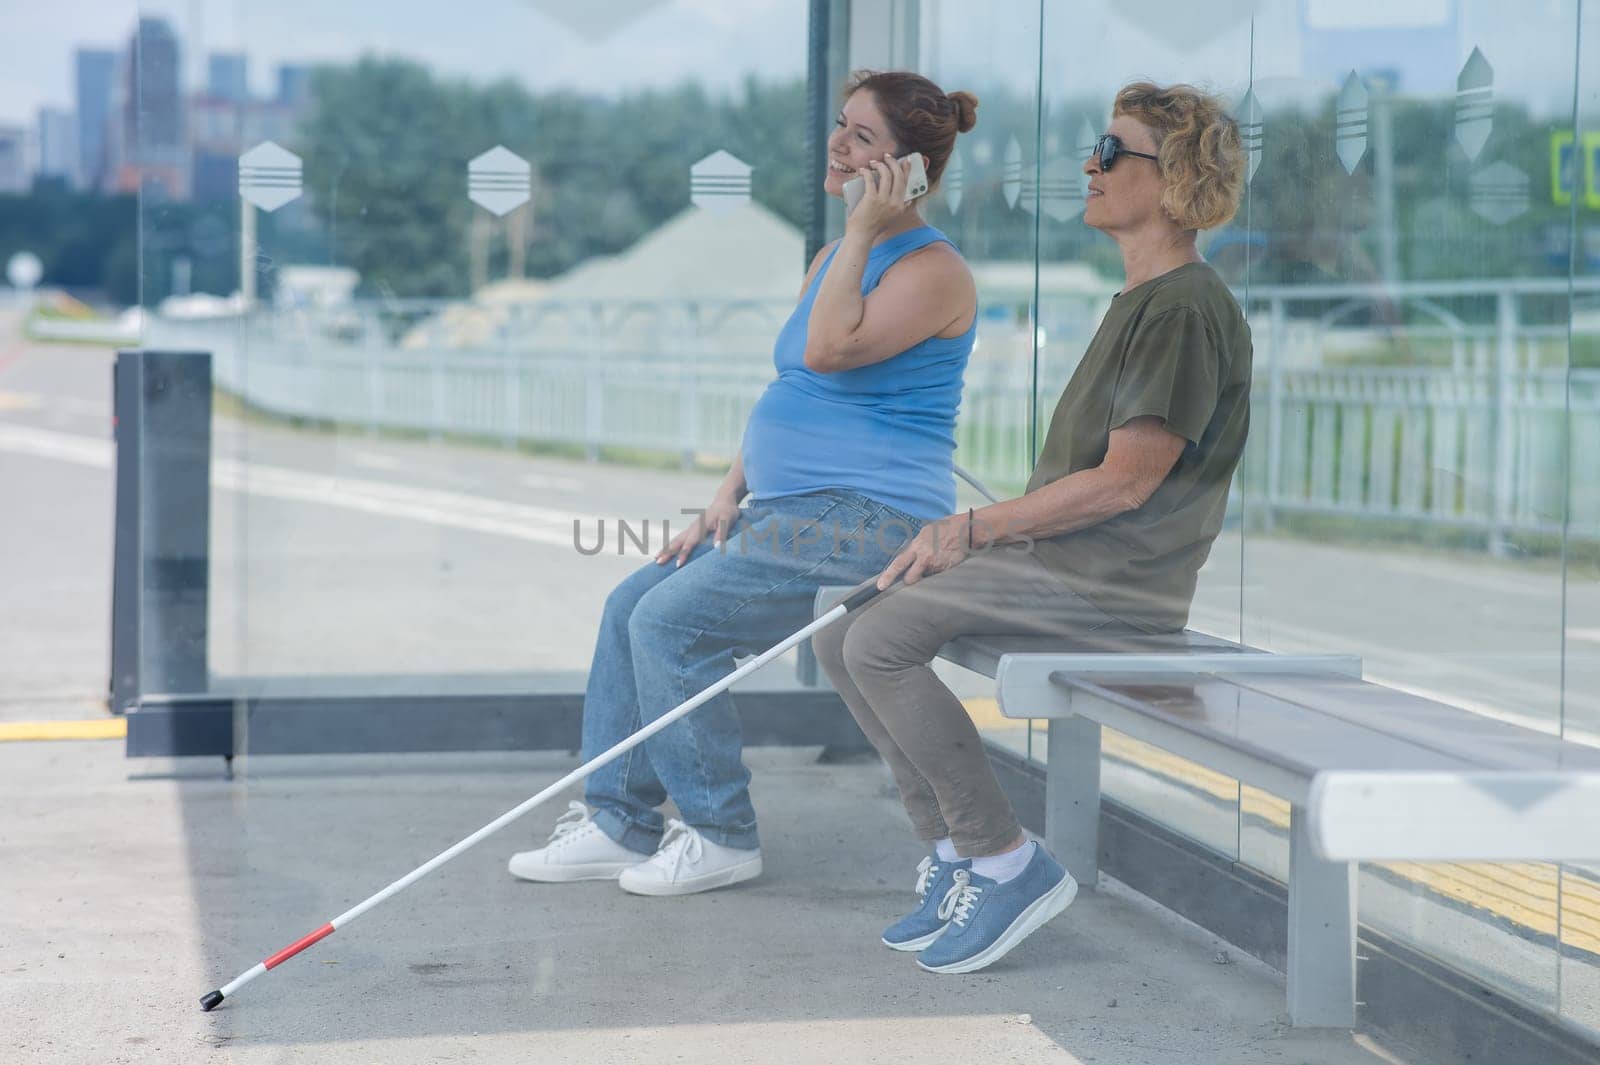 An elderly blind woman and a pregnant woman are sitting at a bus stop and waiting for the bus. by mrwed54